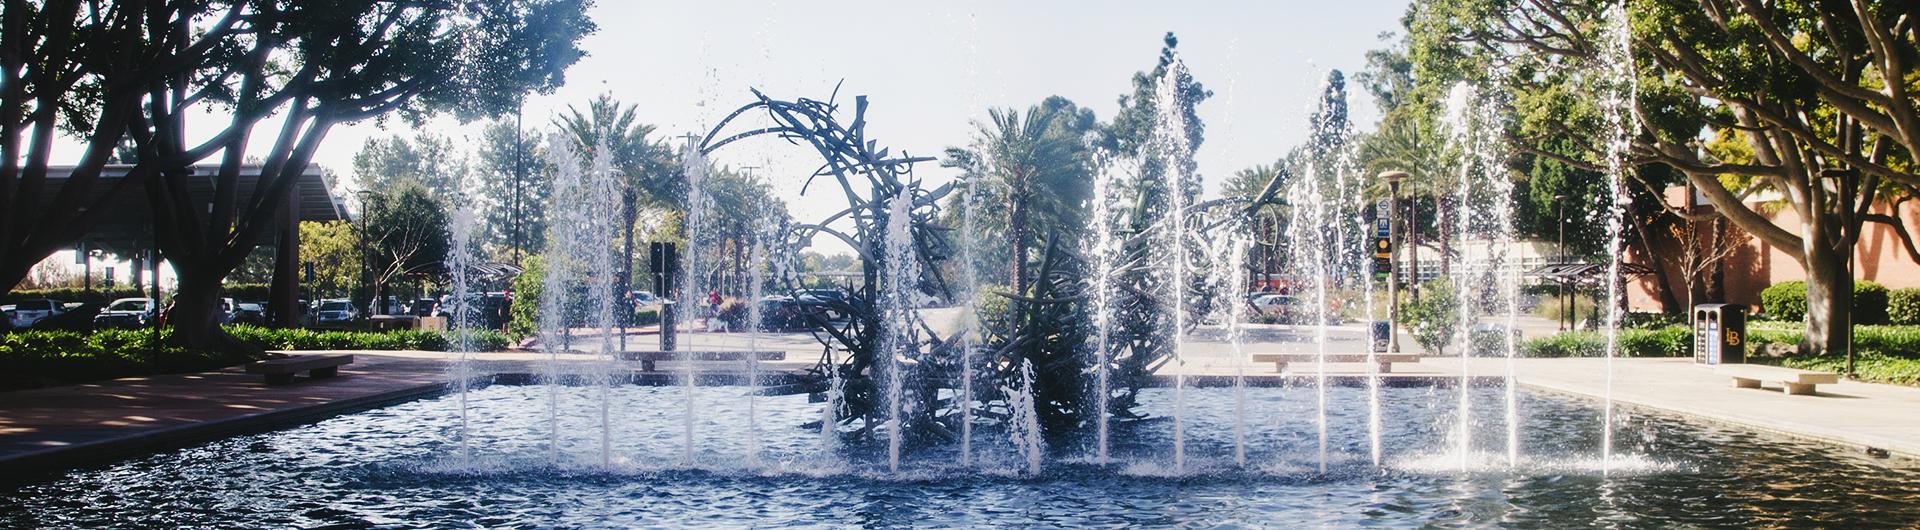 Fountain with sculpture 